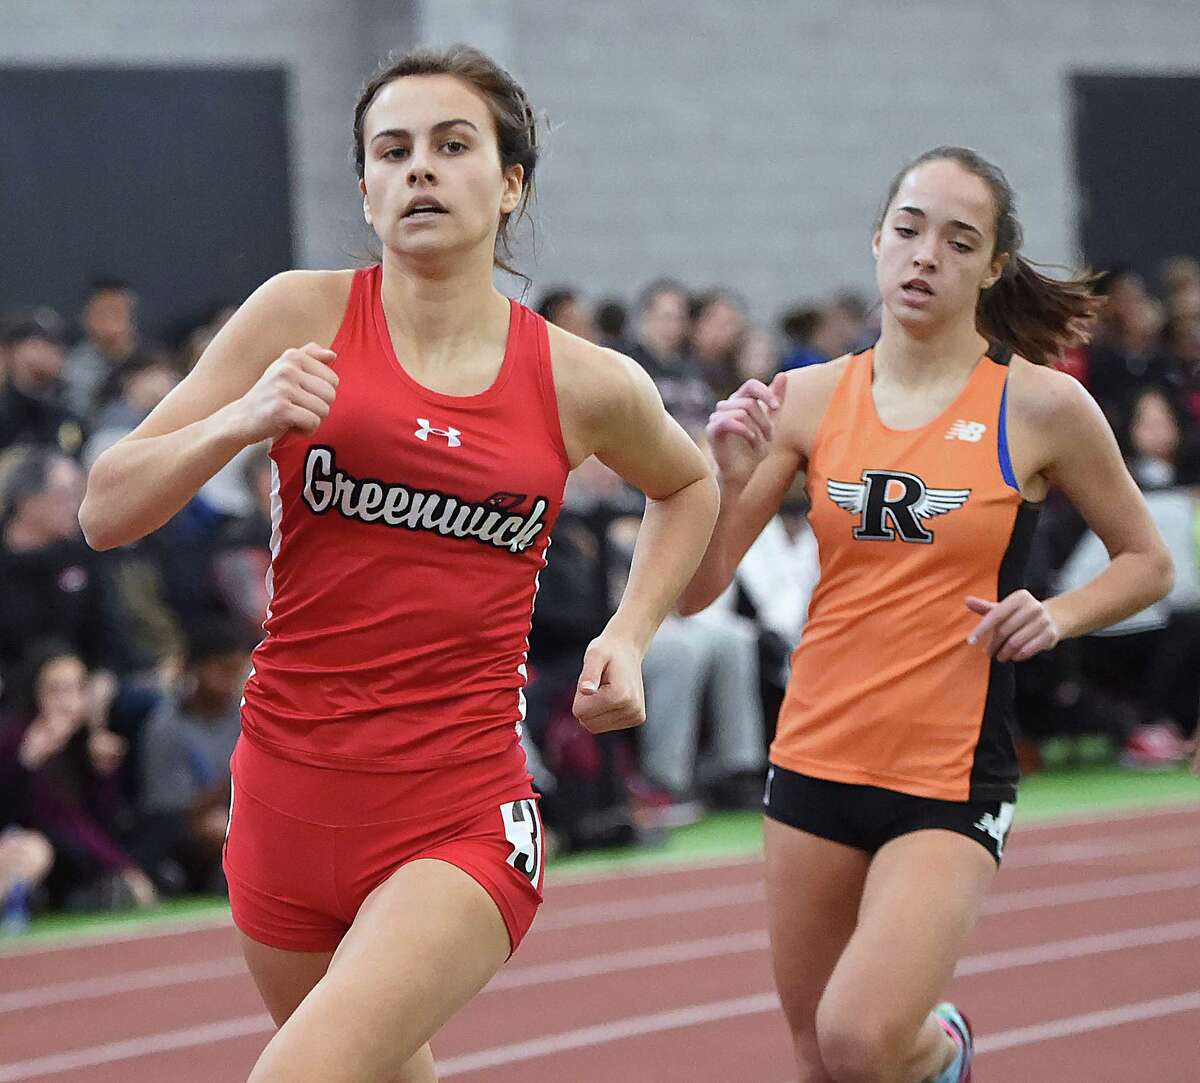 Greenwich's Genevieve DeWinter wins the 600 in 1:35.93 at the CIAC Girls Indoor Track & Field State Open, Saturday, Feb. 17, 2018, at Floyd Little Athletic Center at Hillhouse High School in New Haven.